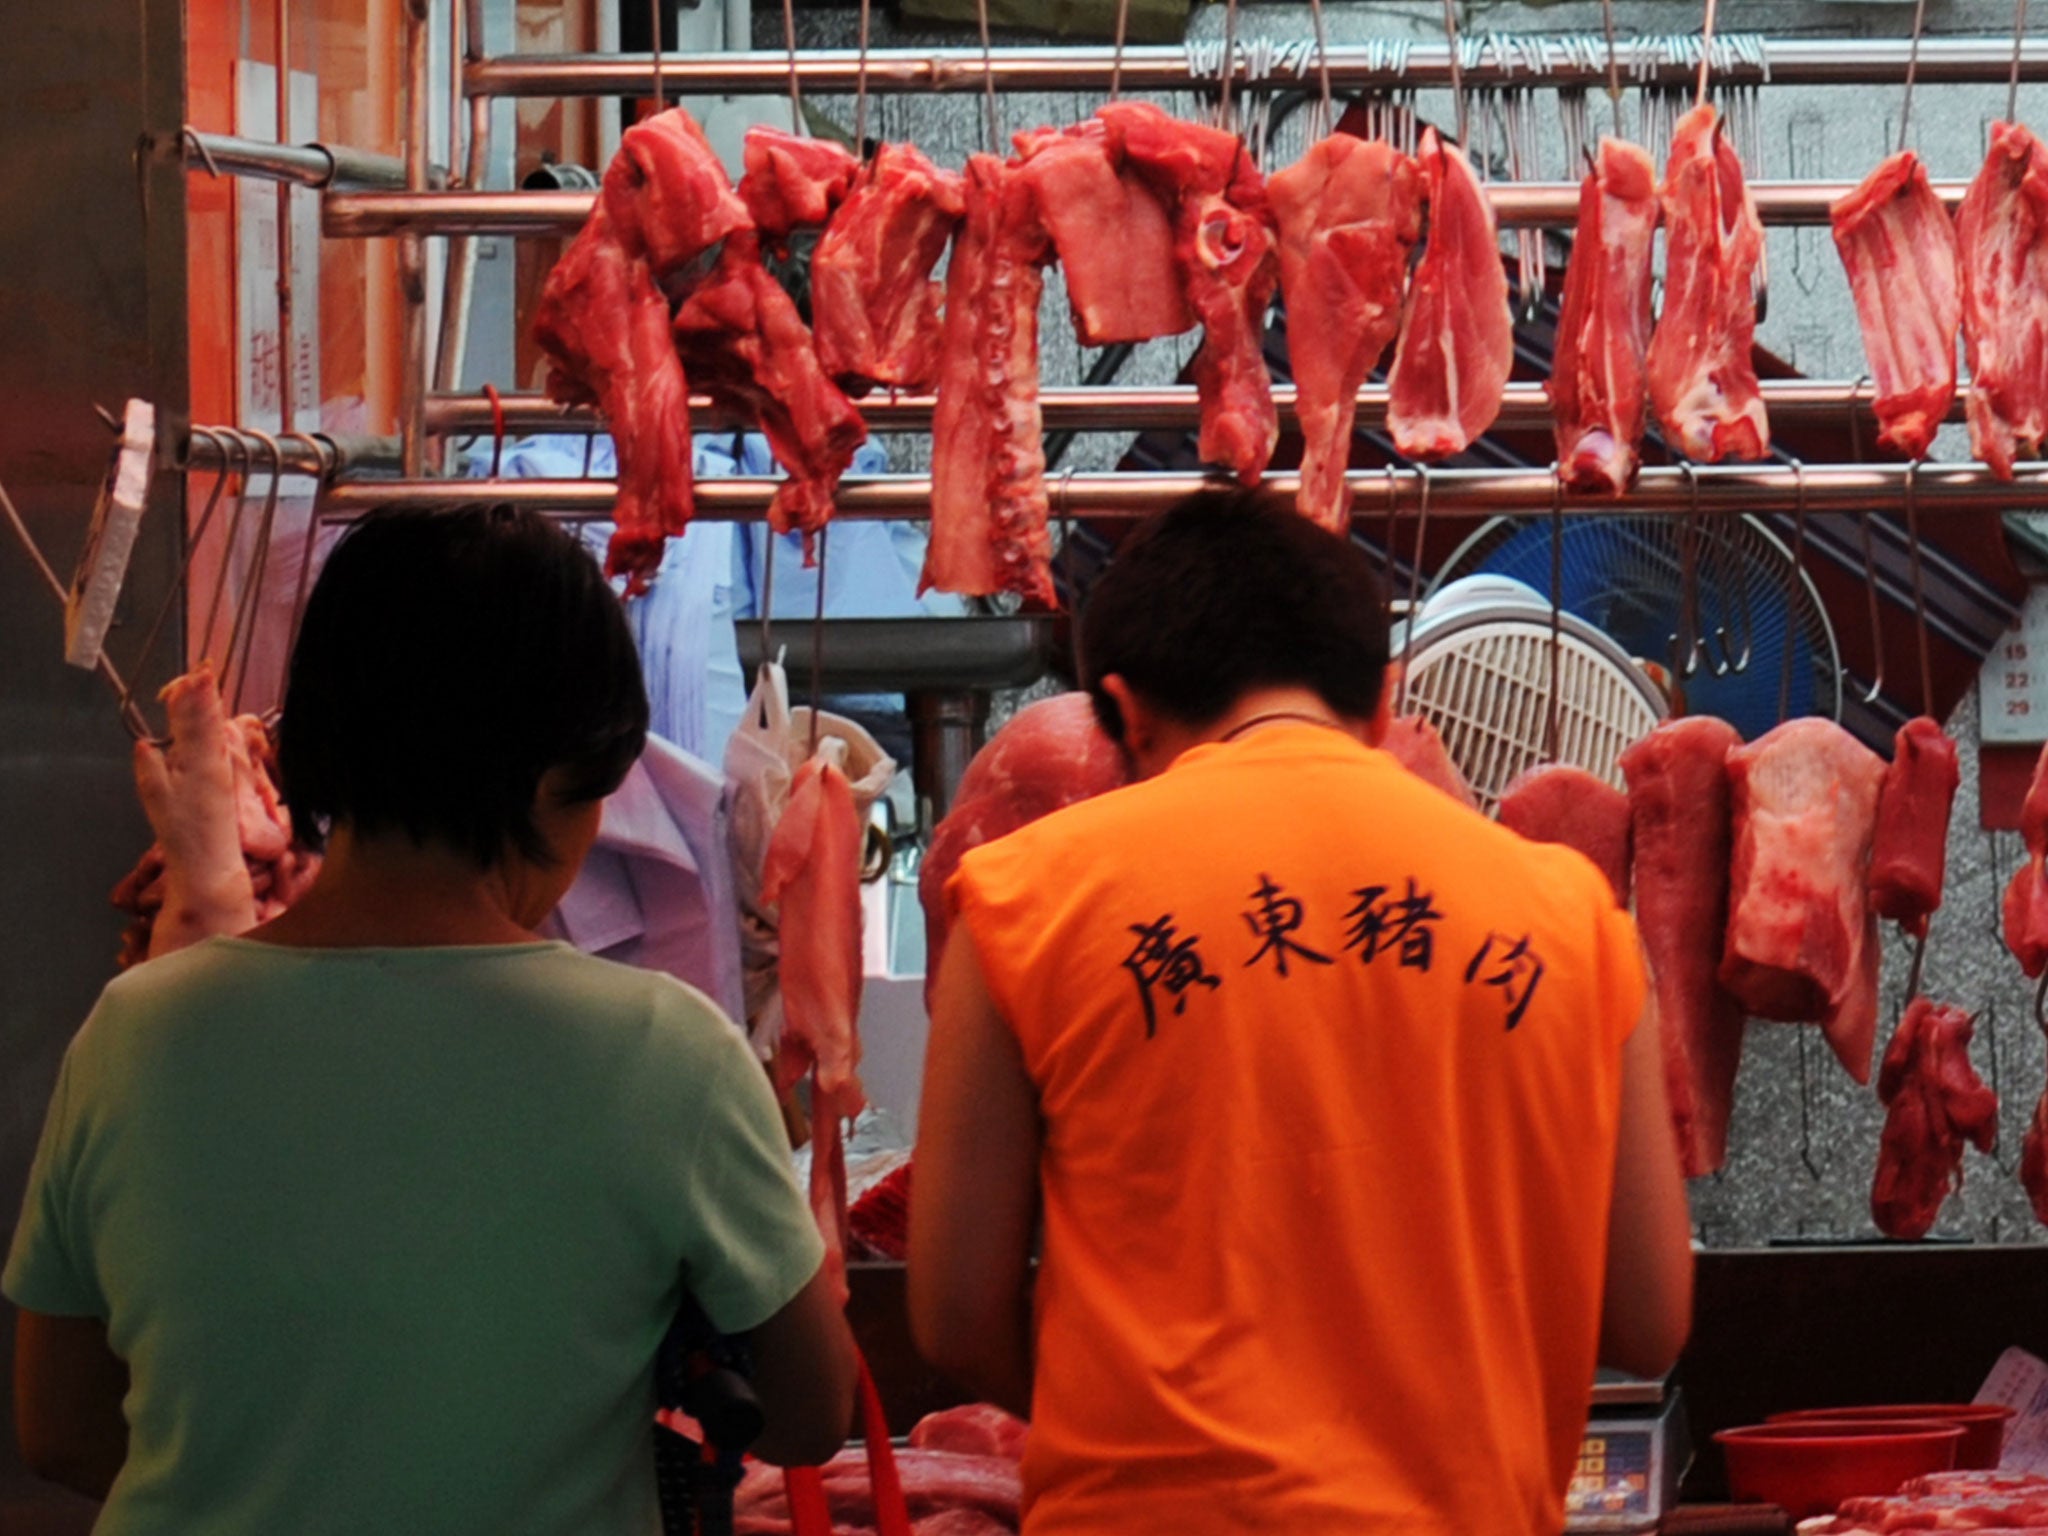 Chinese police have arrested 904 people in an investigation into "meat-related offences"